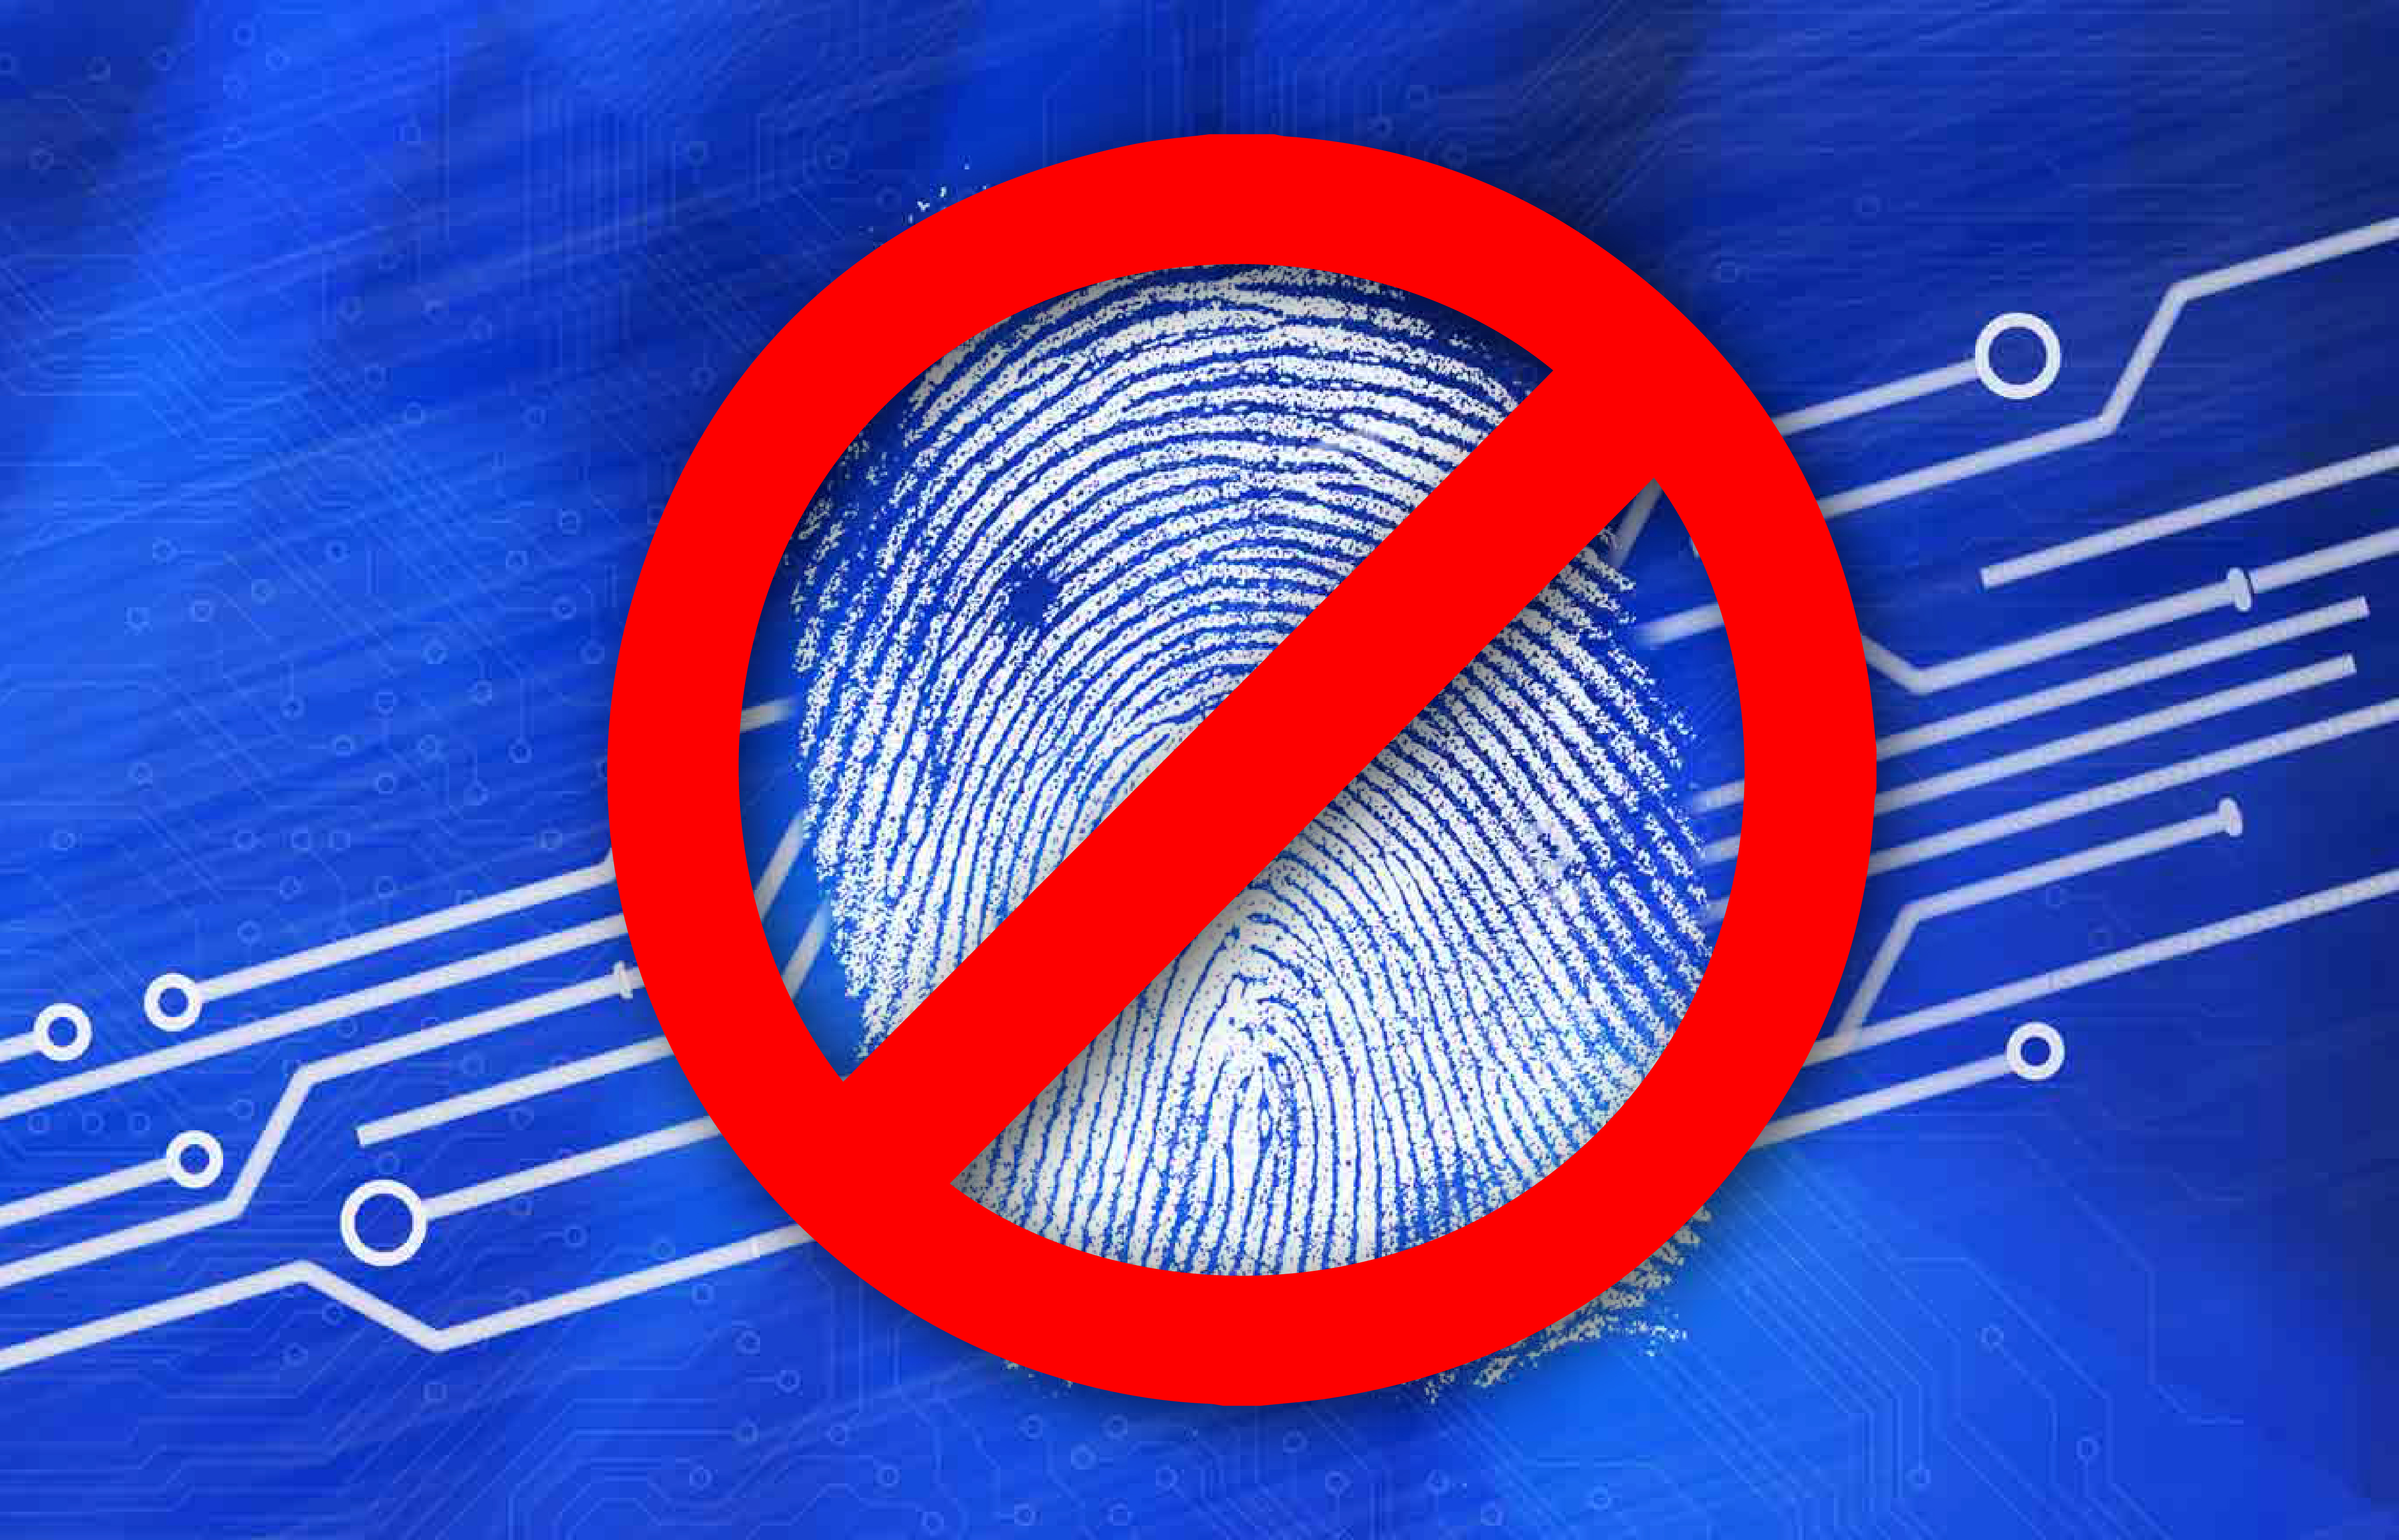 Do not use certificate thumbprint pinning to verify a certificate